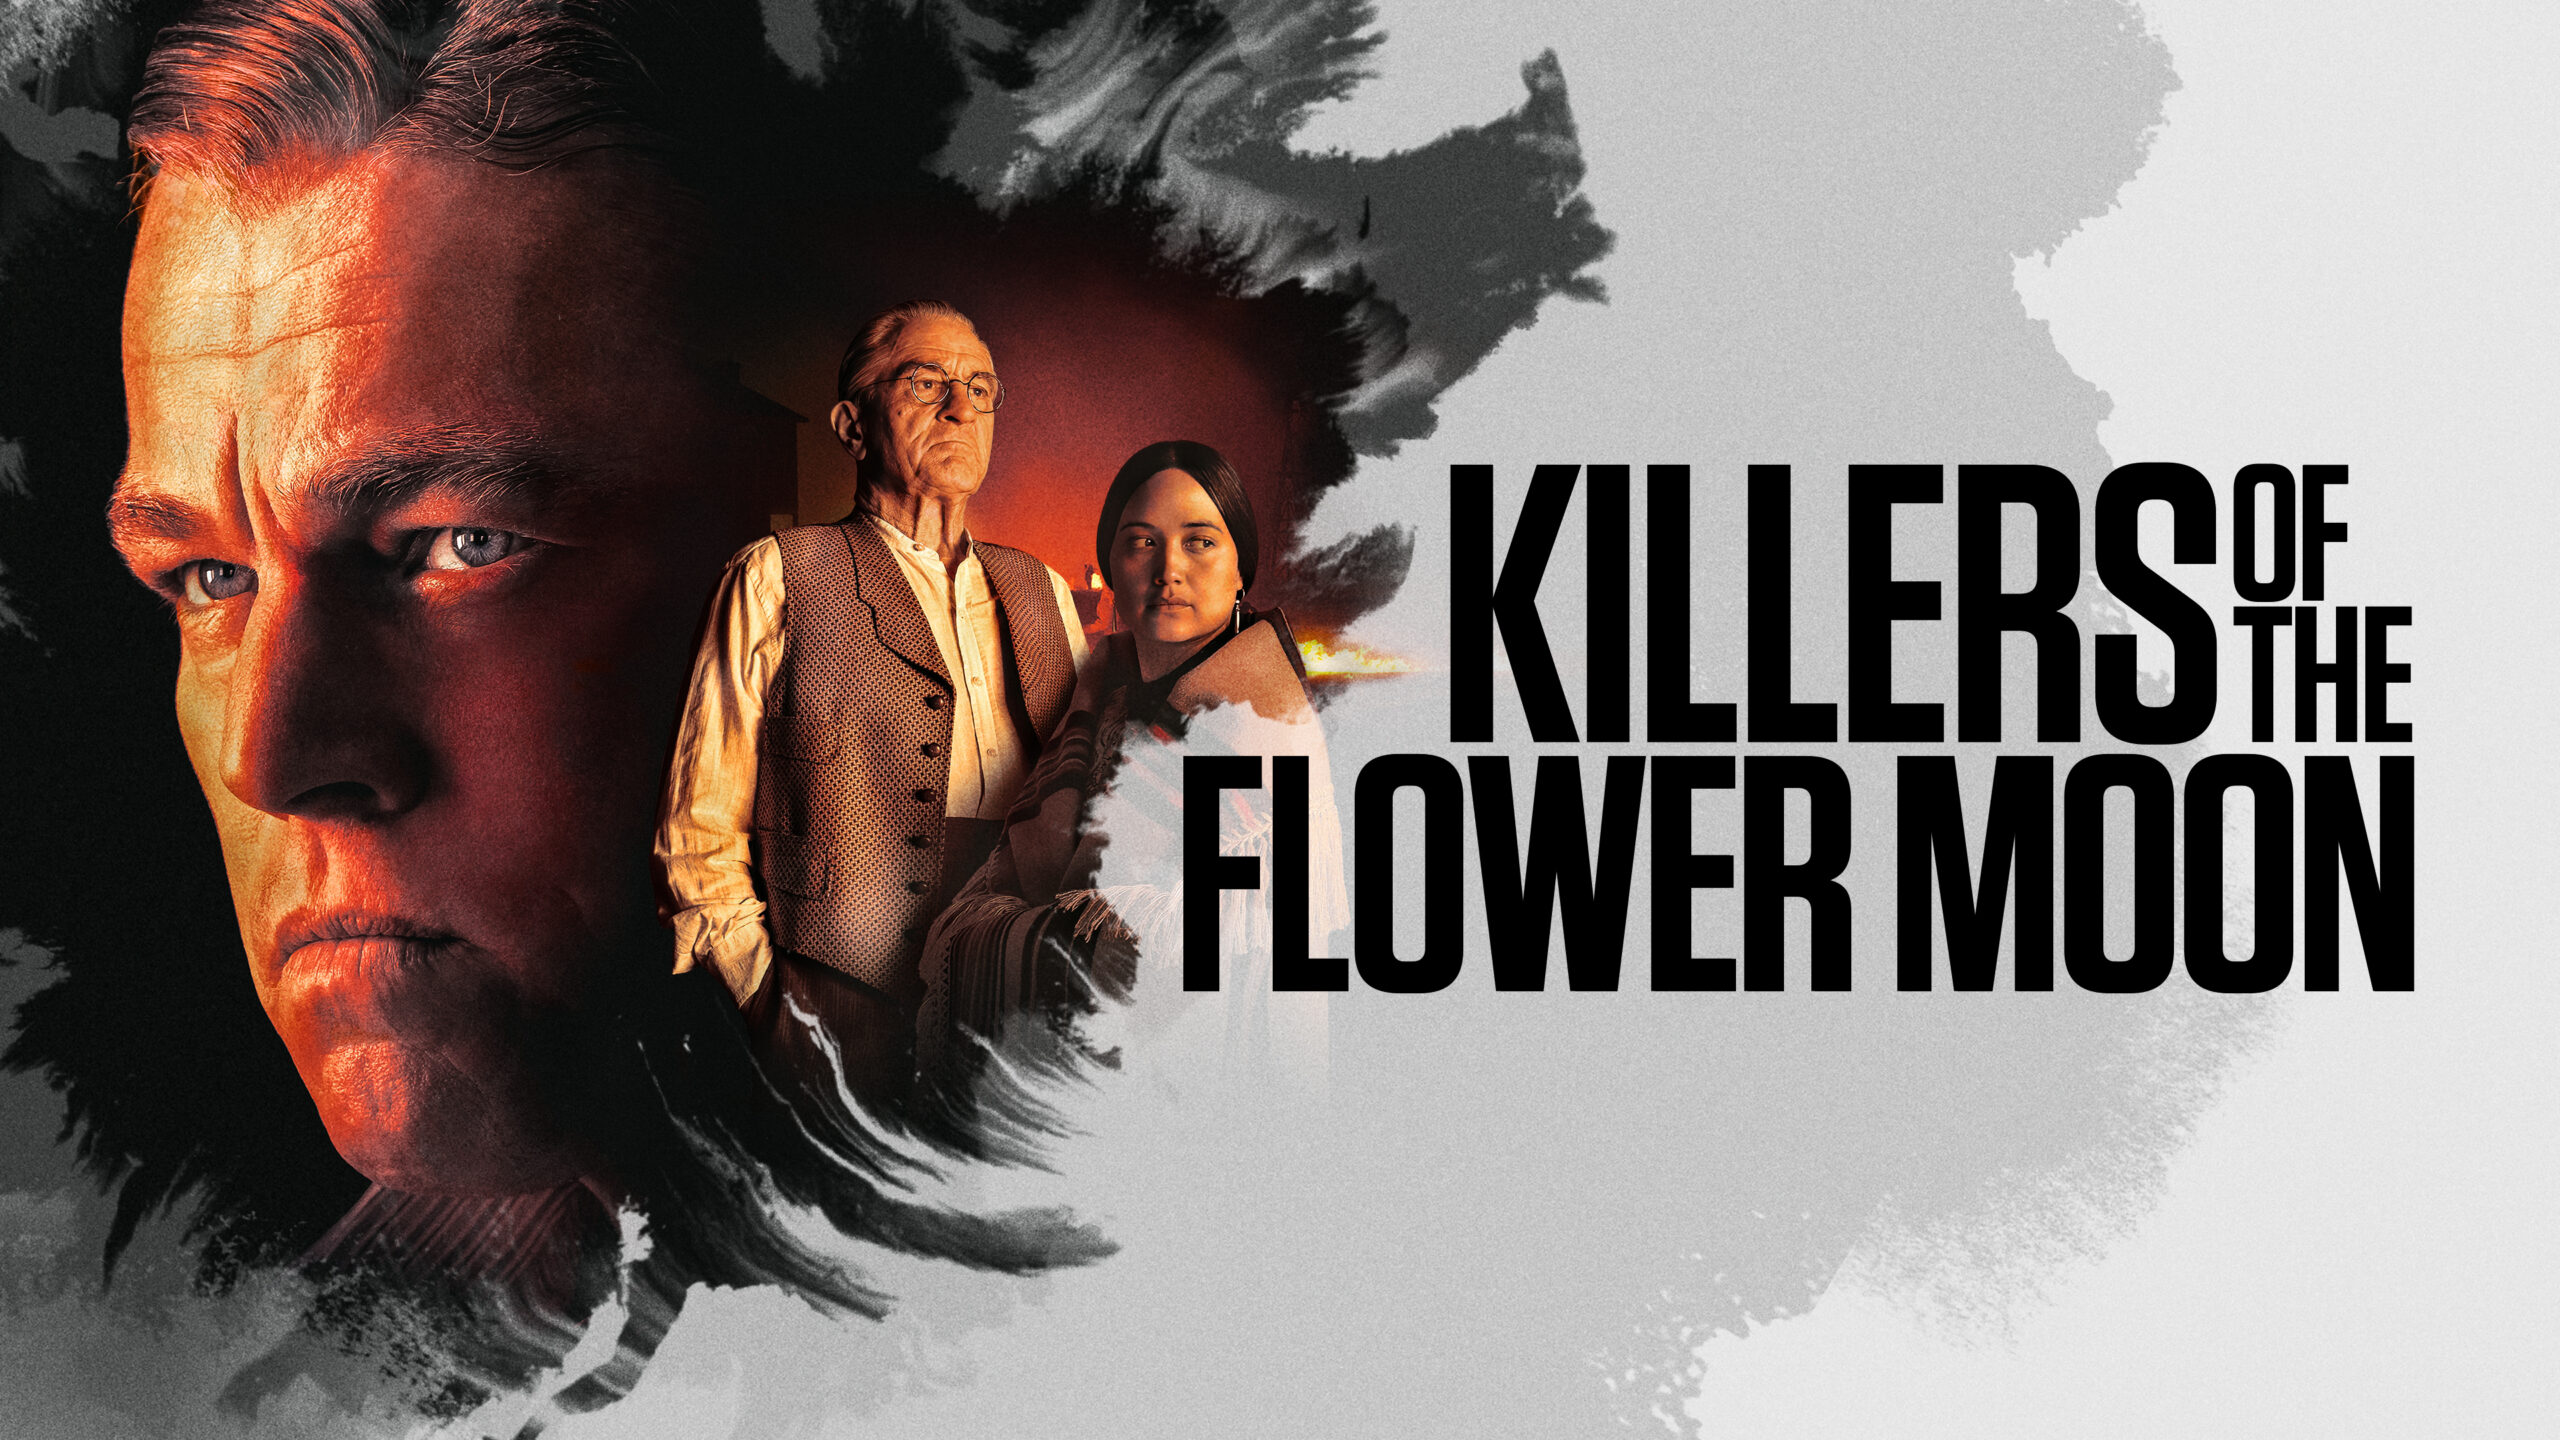 Where can I watch Killers of the Flower Moon in India?